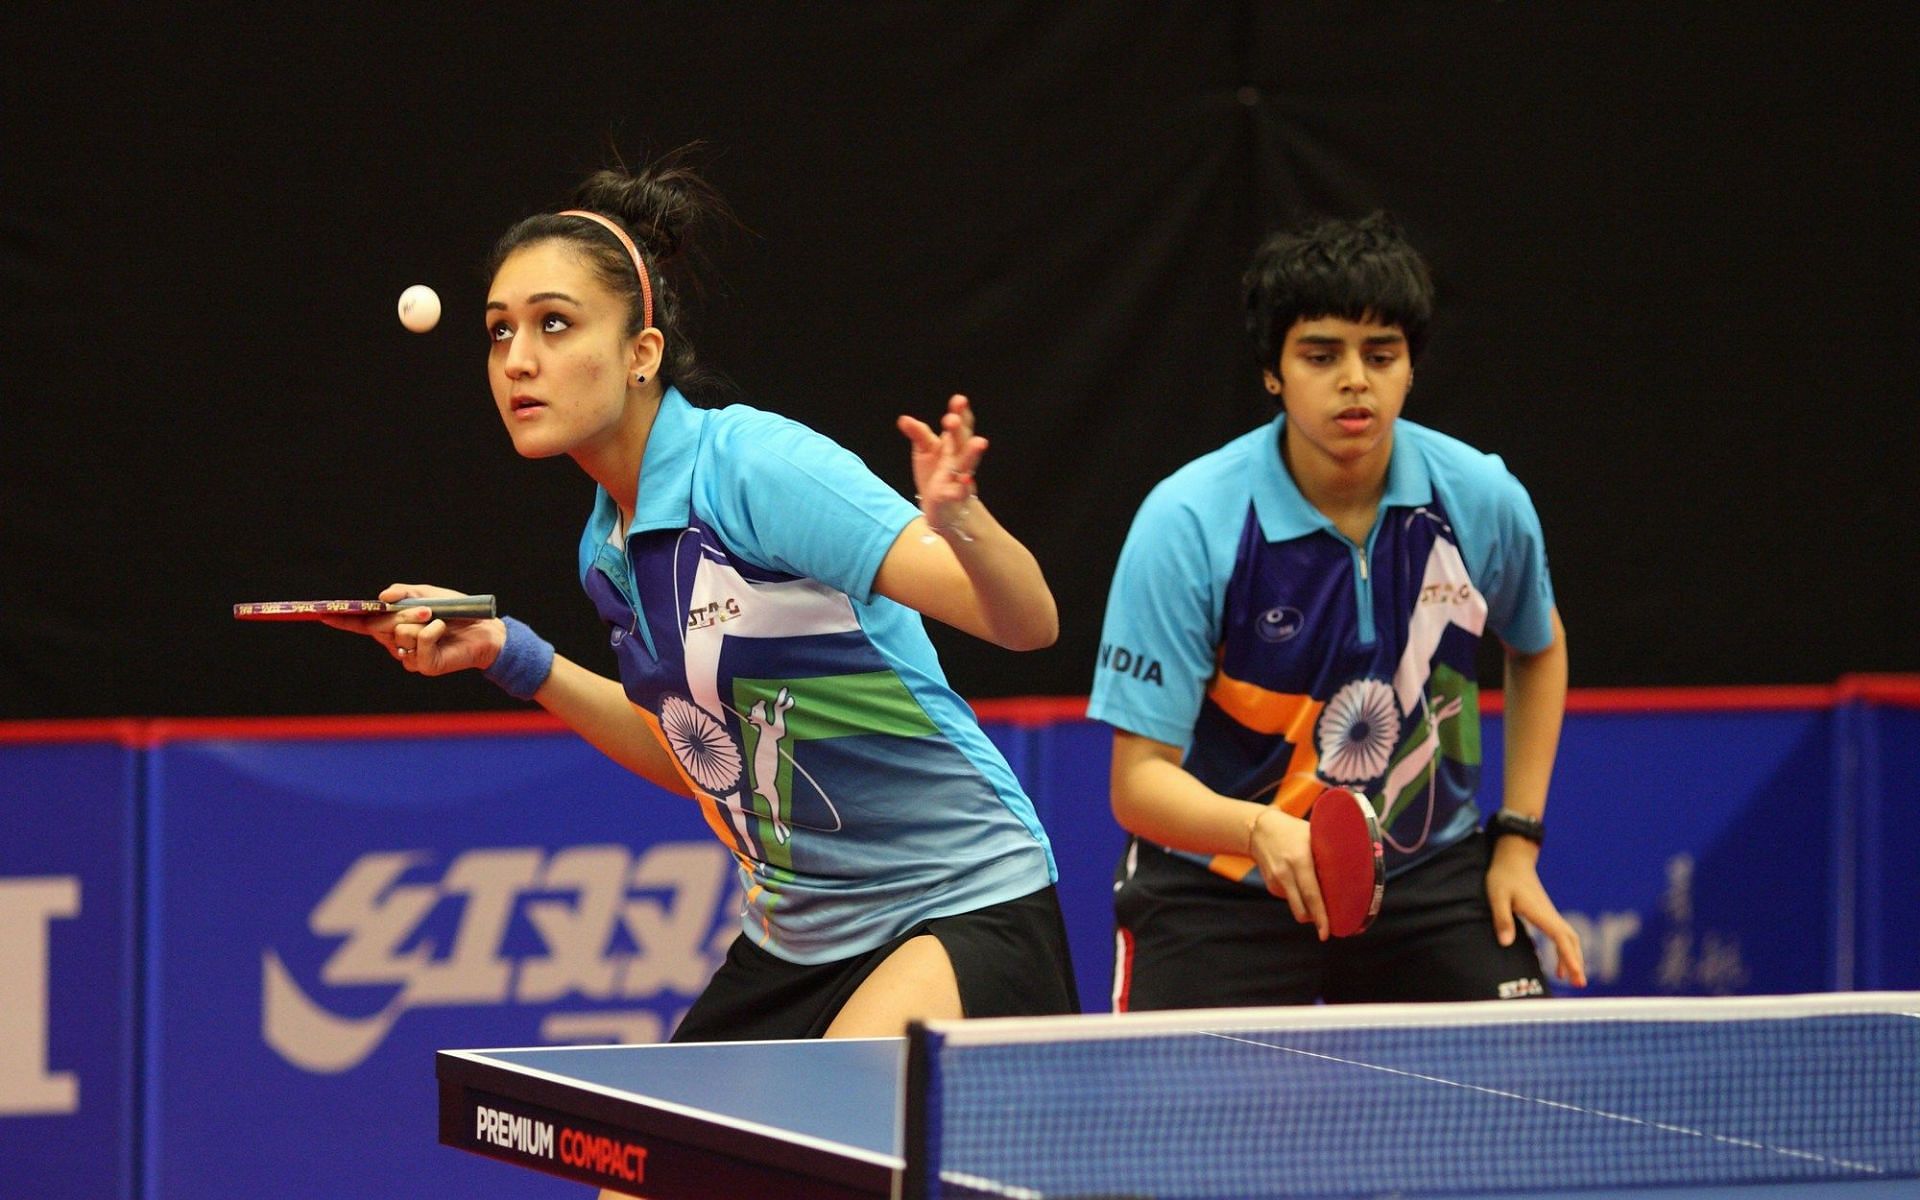 Indian table tennis players Manika Batra (L) and Archana Kamath in action. (PC: ITTF World)